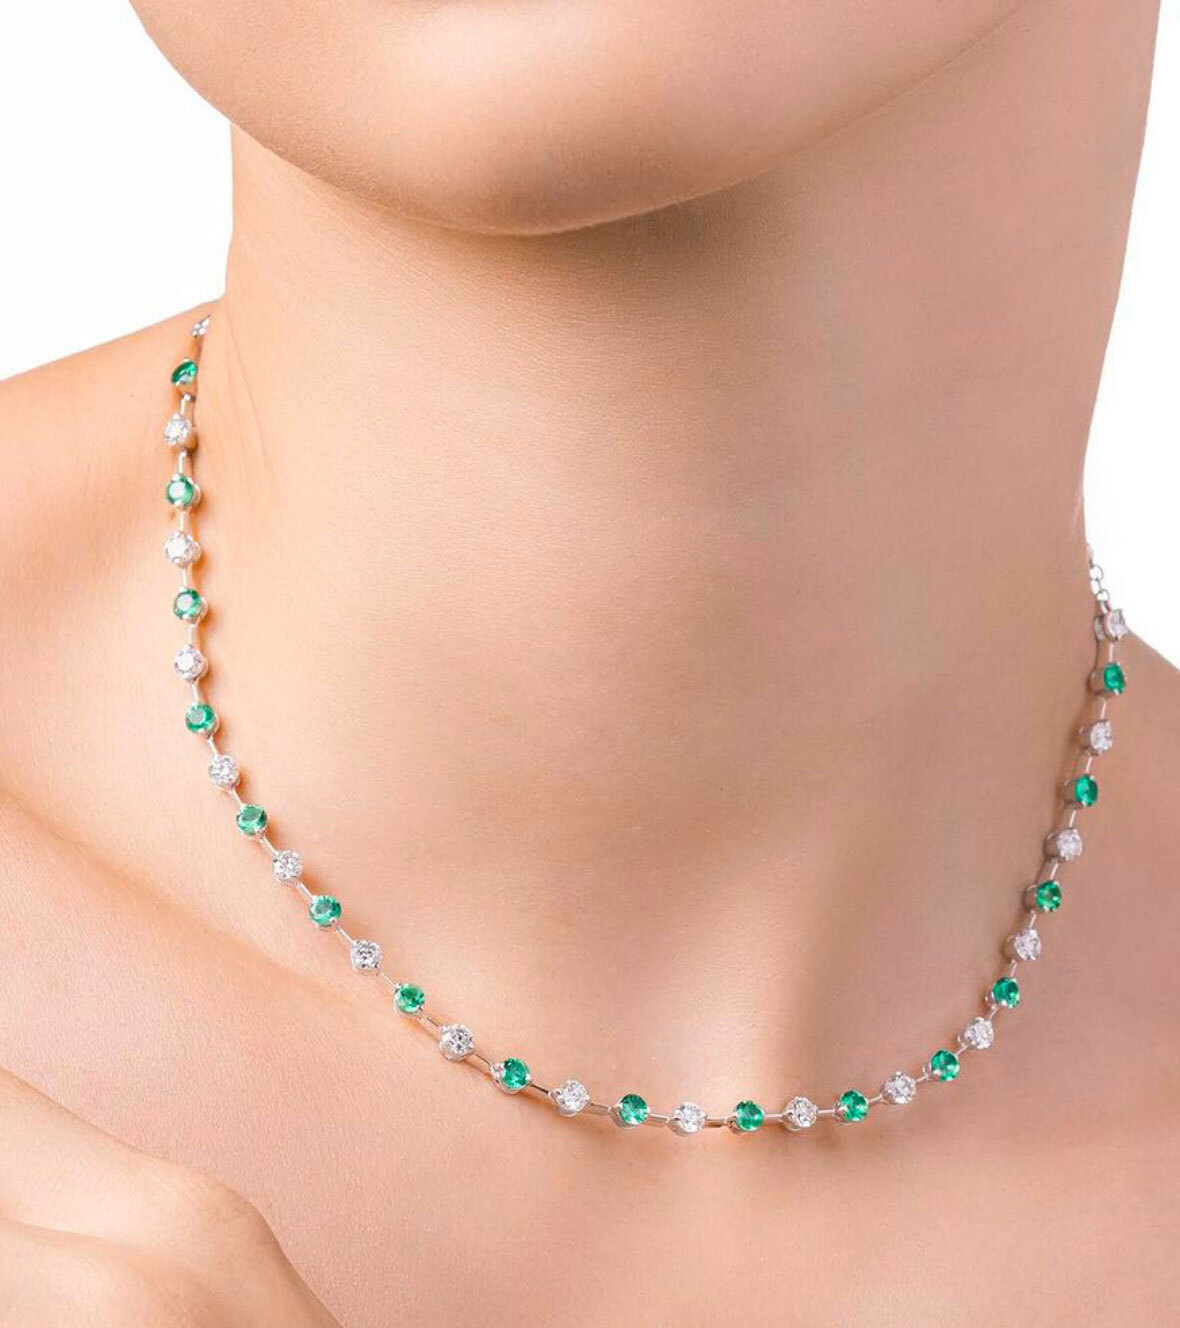 White-Gold Necklace with Diamonds and Emeralds 00921 by Mentis CollectionCasato